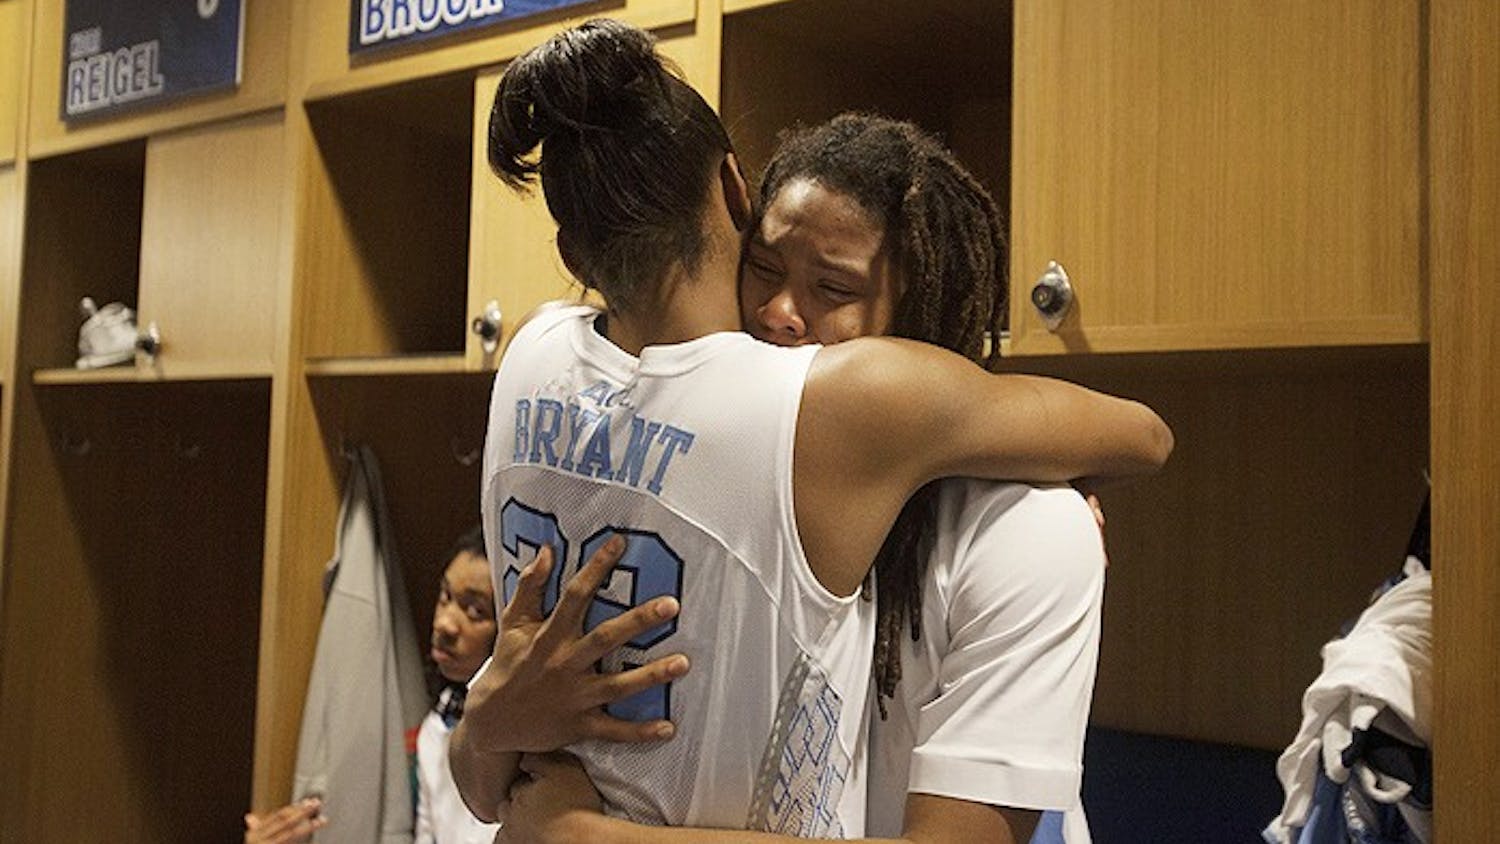 	N’Dea Bryant hugs Tierra Ruffin-Pratt after the UNC Women’s basketball team lost to Delaware in the second round of the NCAA tournament on Tuesday night.